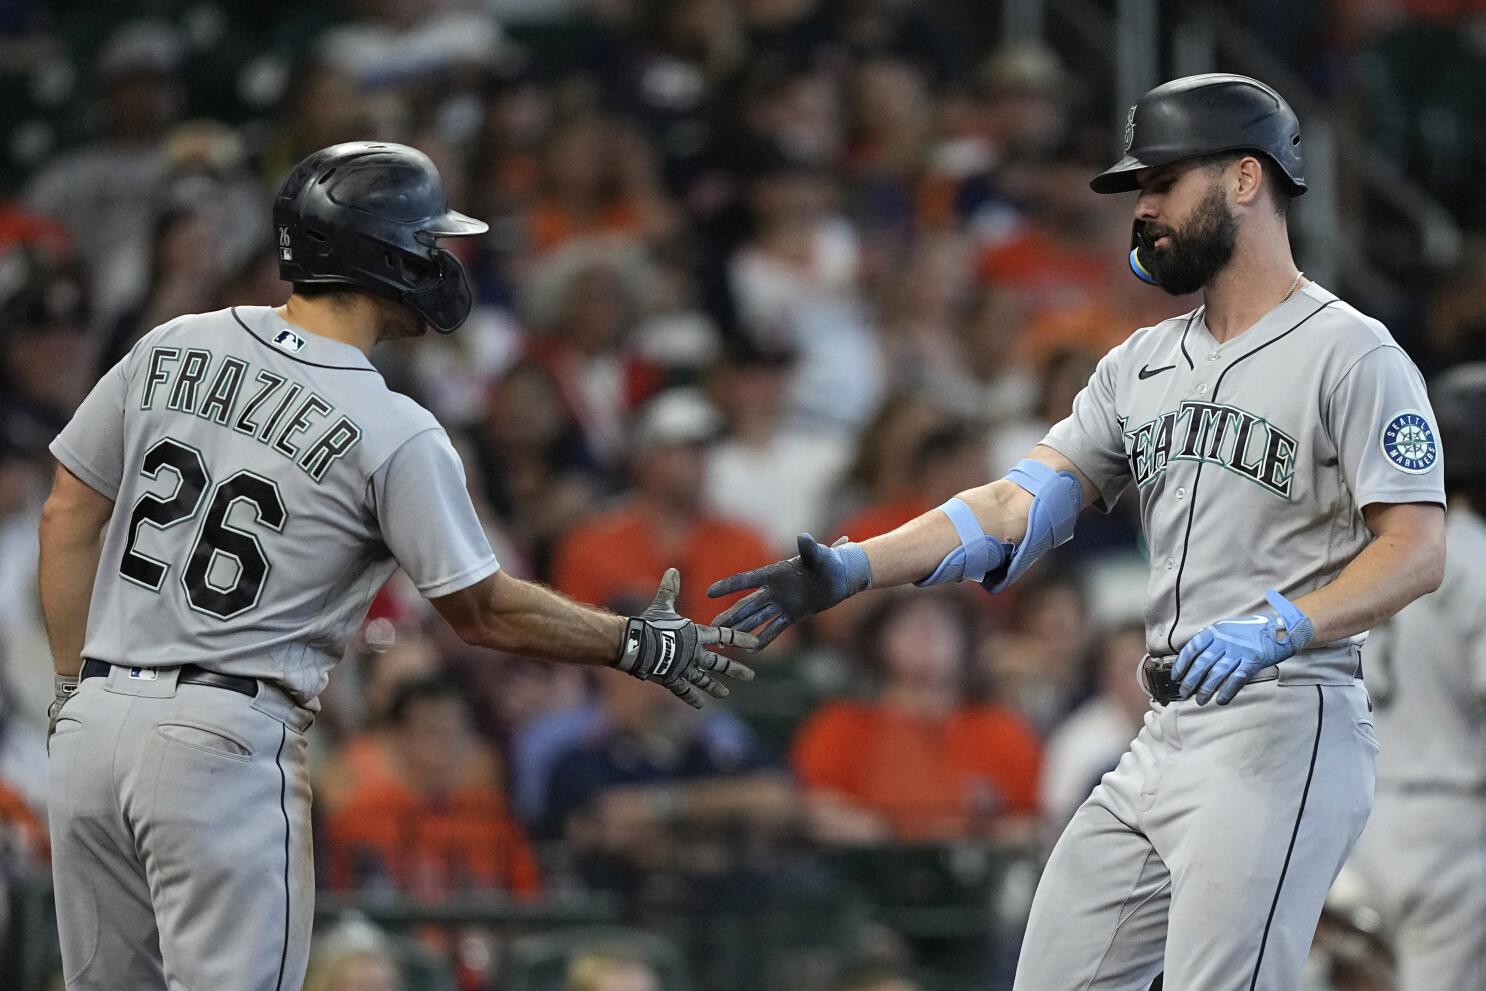 Raleigh's RBI single in 10th gives M's 1-0 win over Yankees